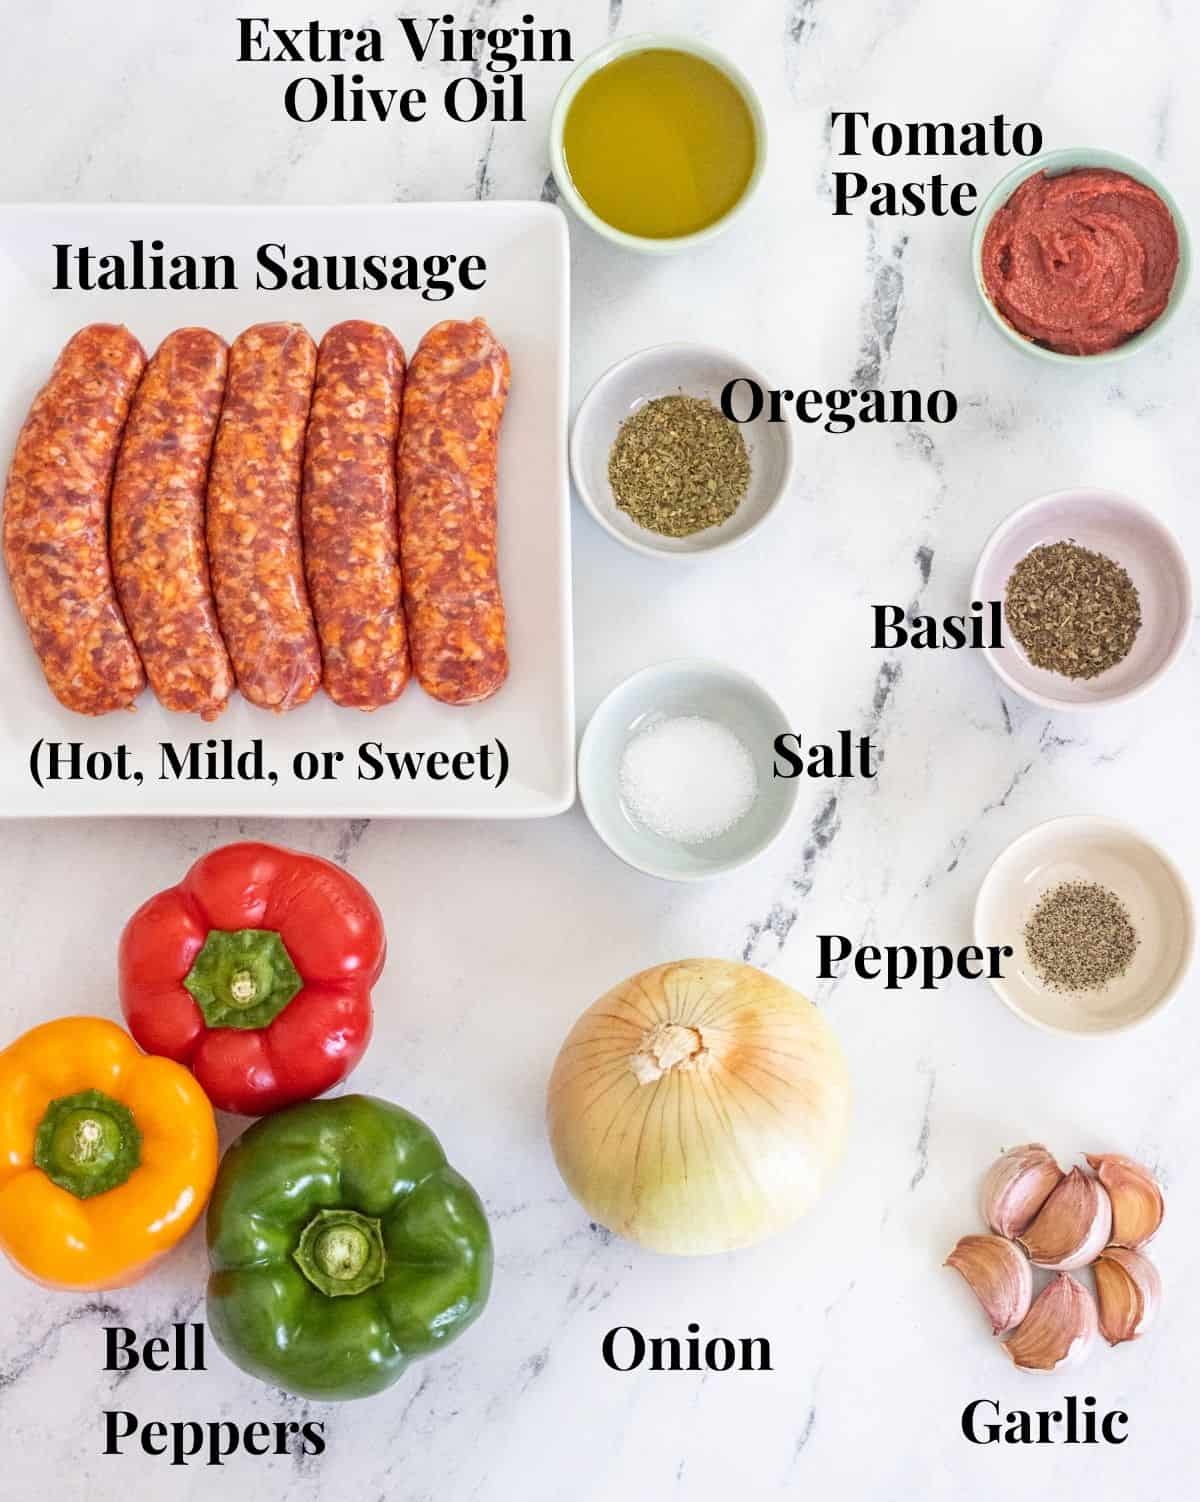 Baked Italian sausage ingredients with labels.